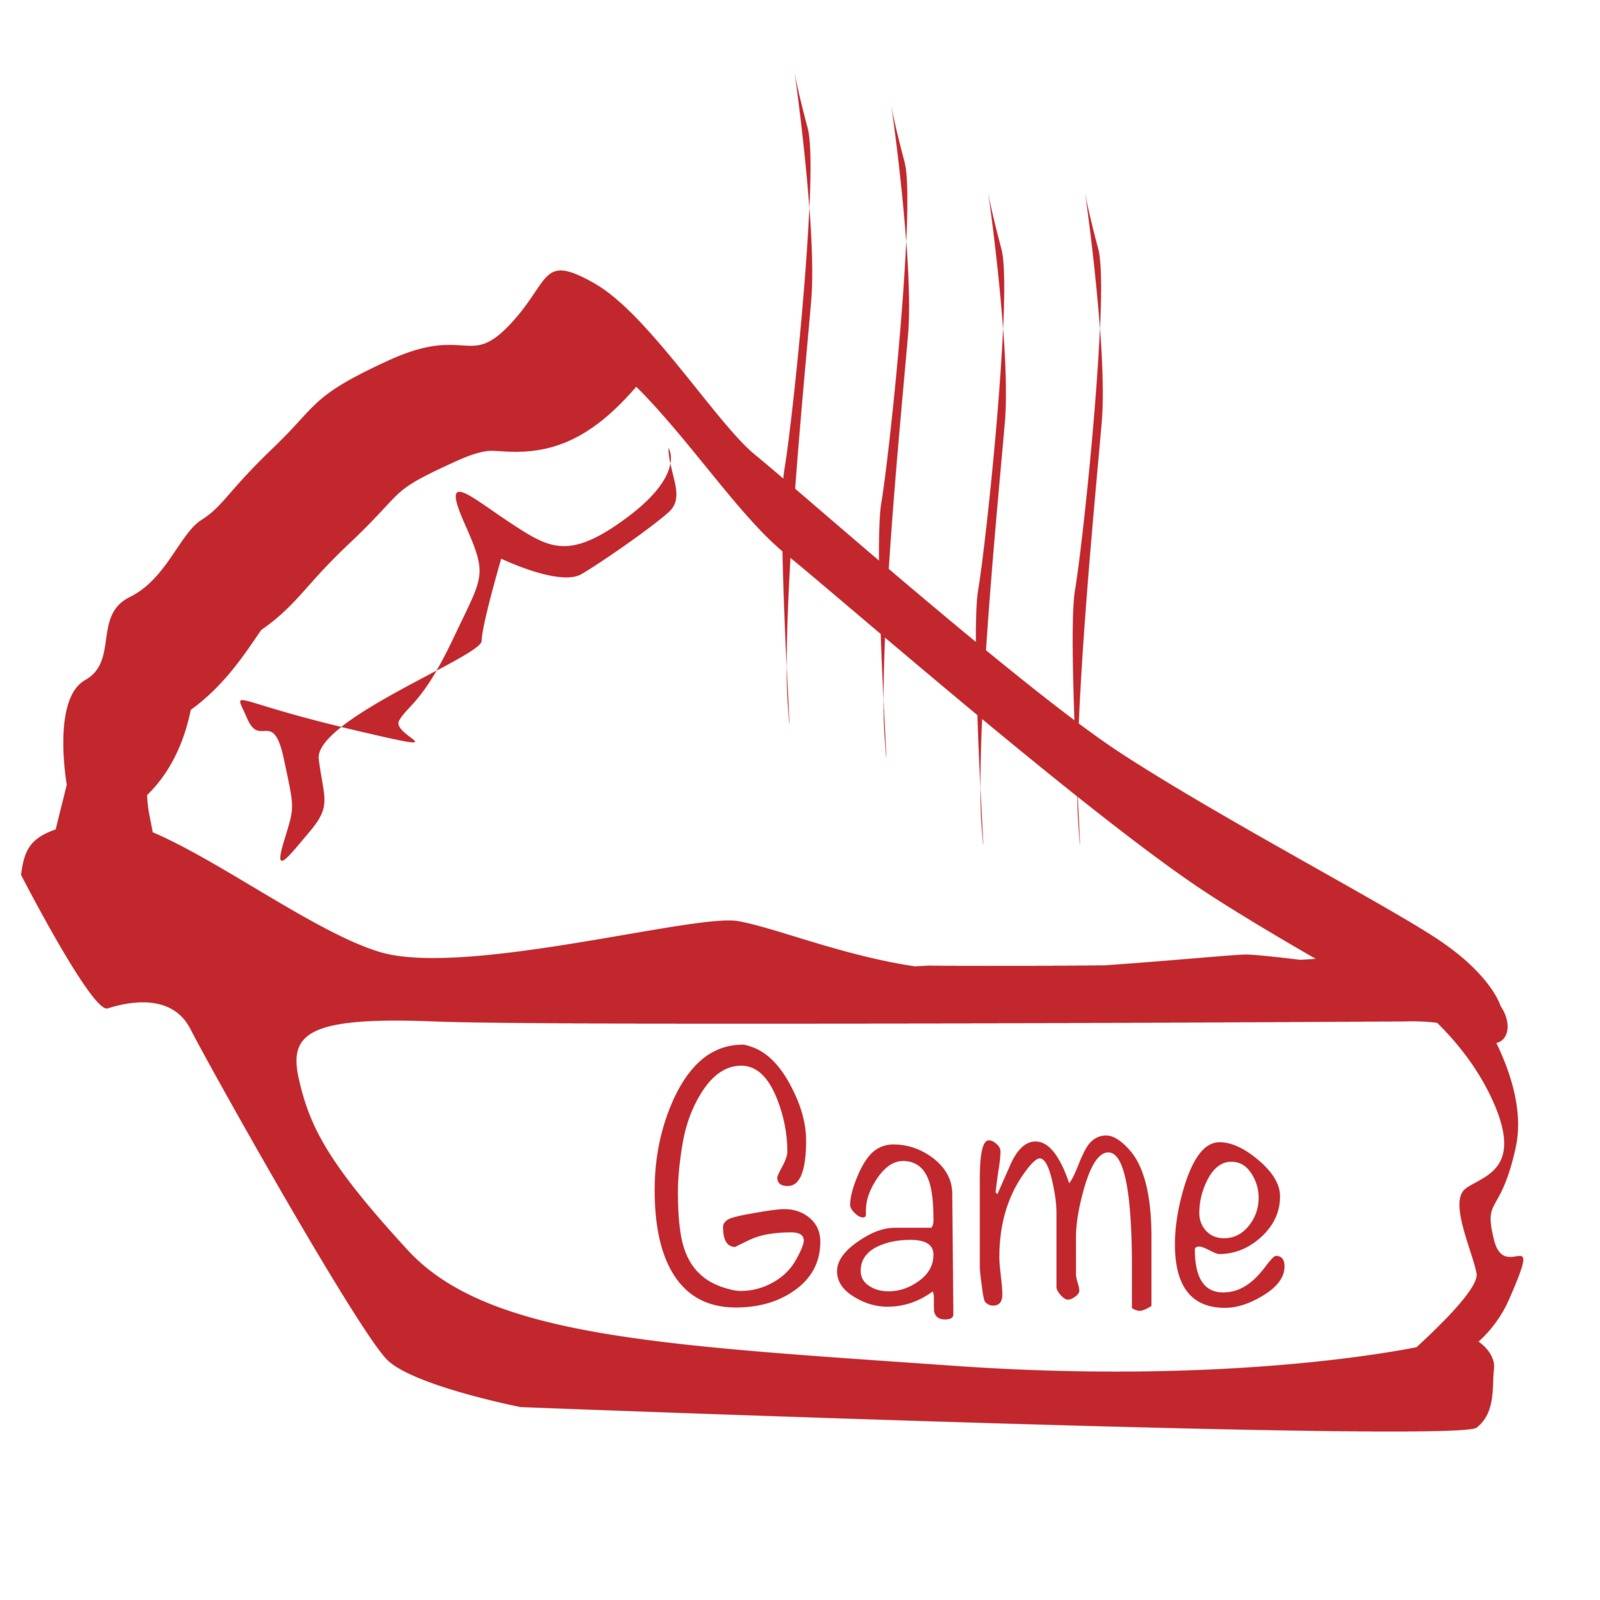 Cartoon depiction of a hot game pie slice over a white background